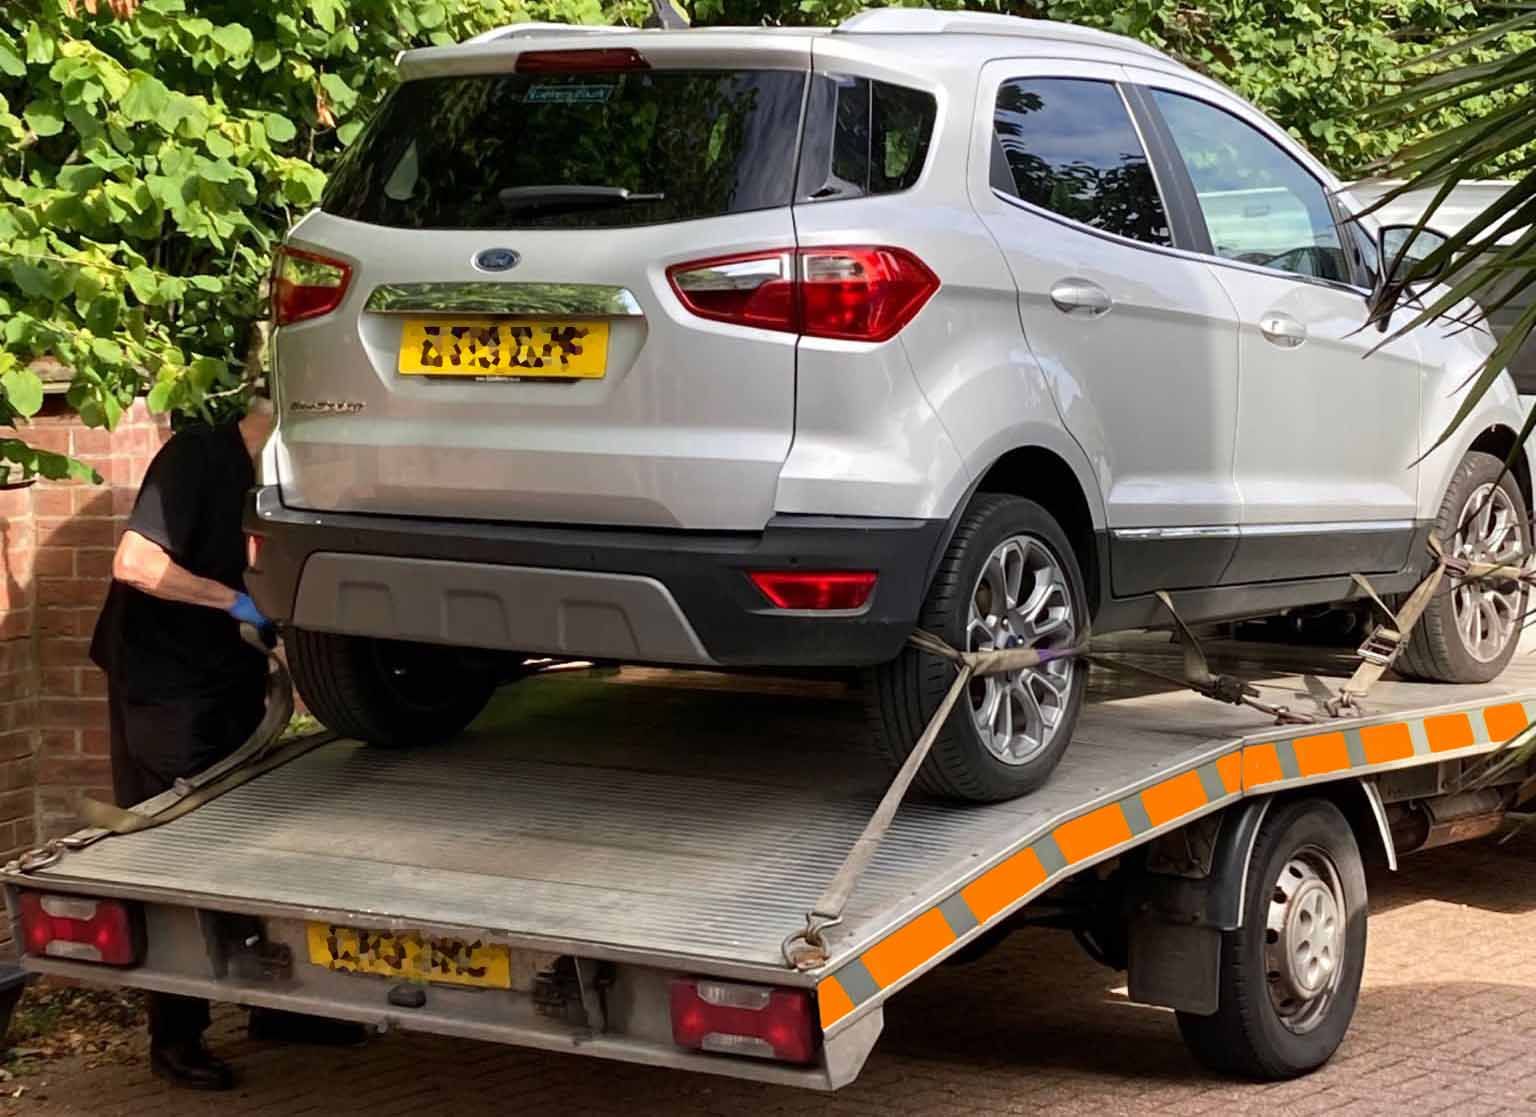 Ecosport being collected ready for scrap metal